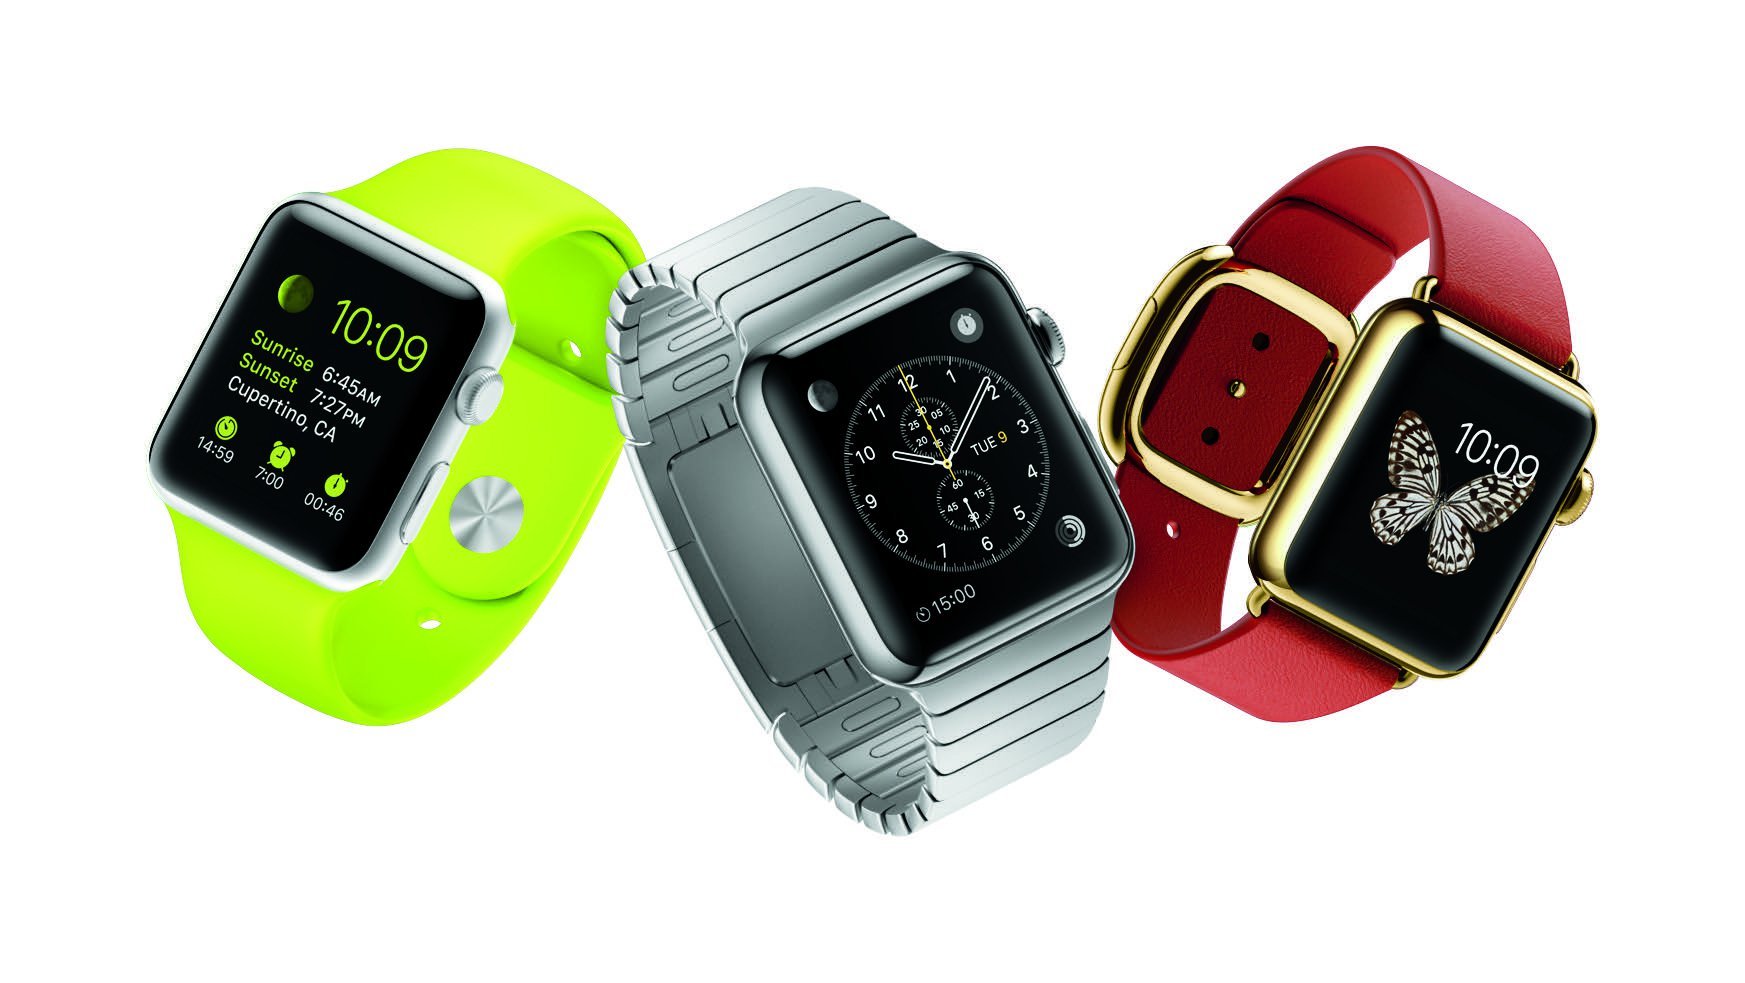 This is what you absolutely need to know about the Apple Watch release.